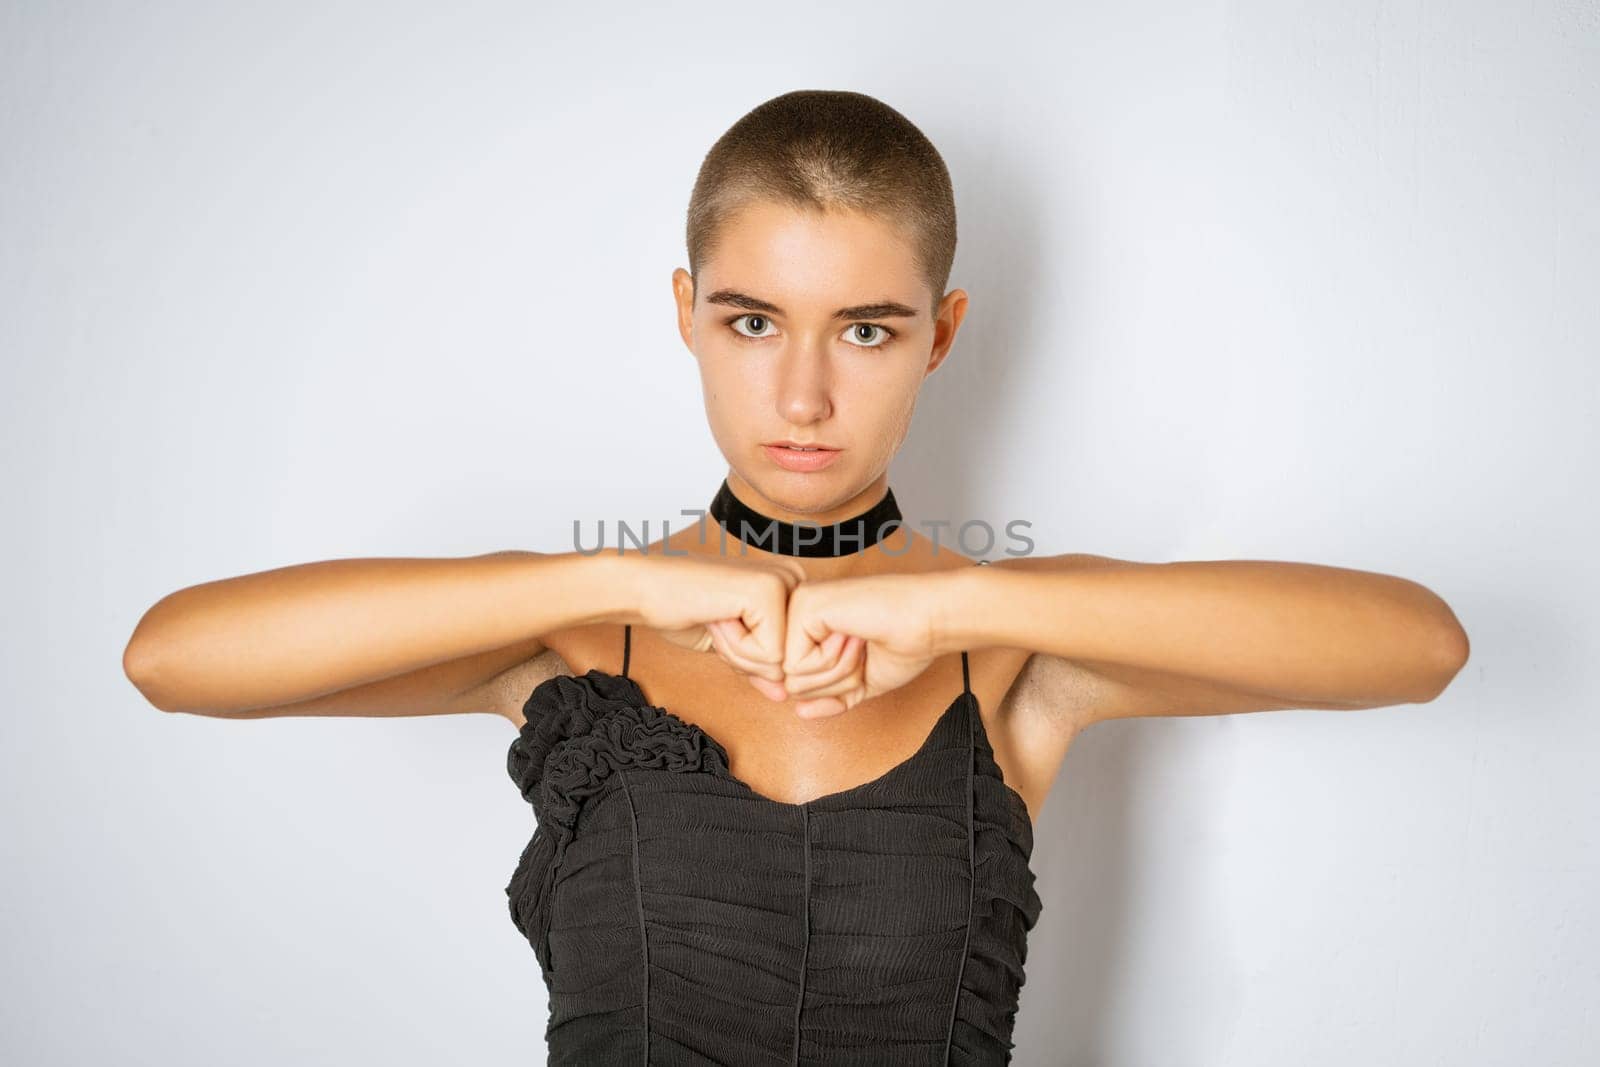 Portrait of a young woman with a short haircut with clenched fists on a light background by EkaterinaPereslavtseva